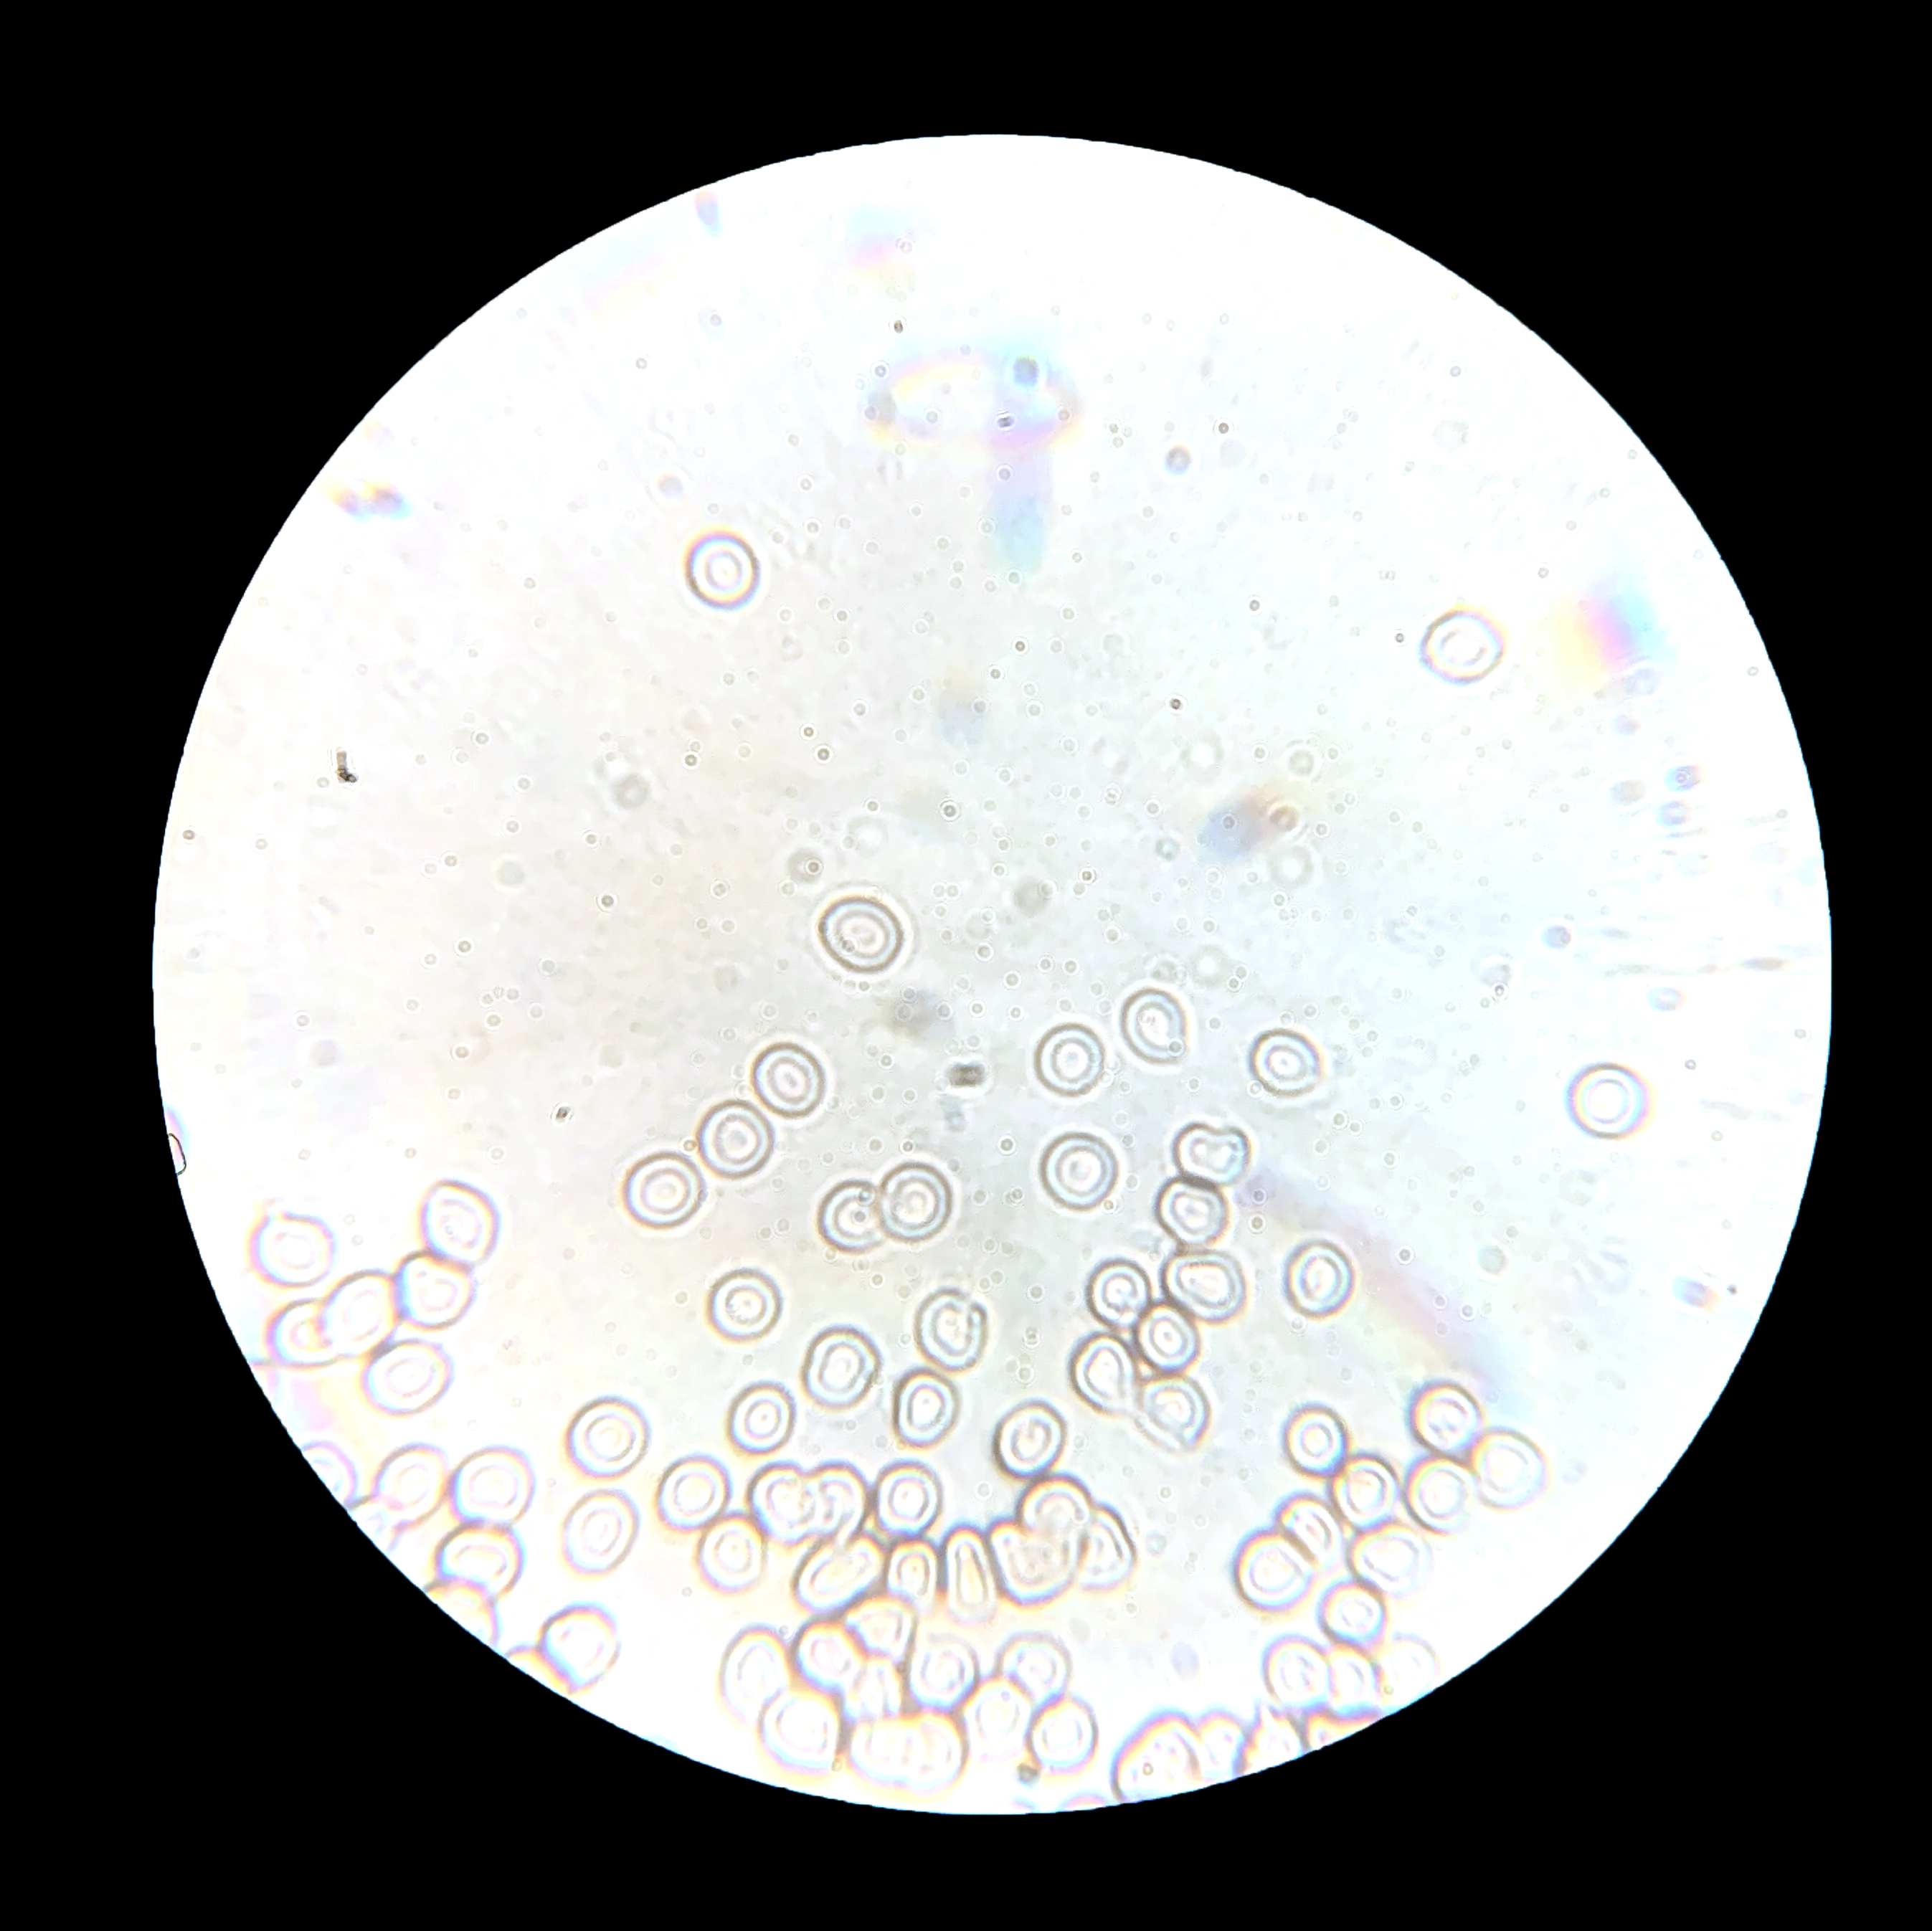 Human White Blood Cells Under Microscope